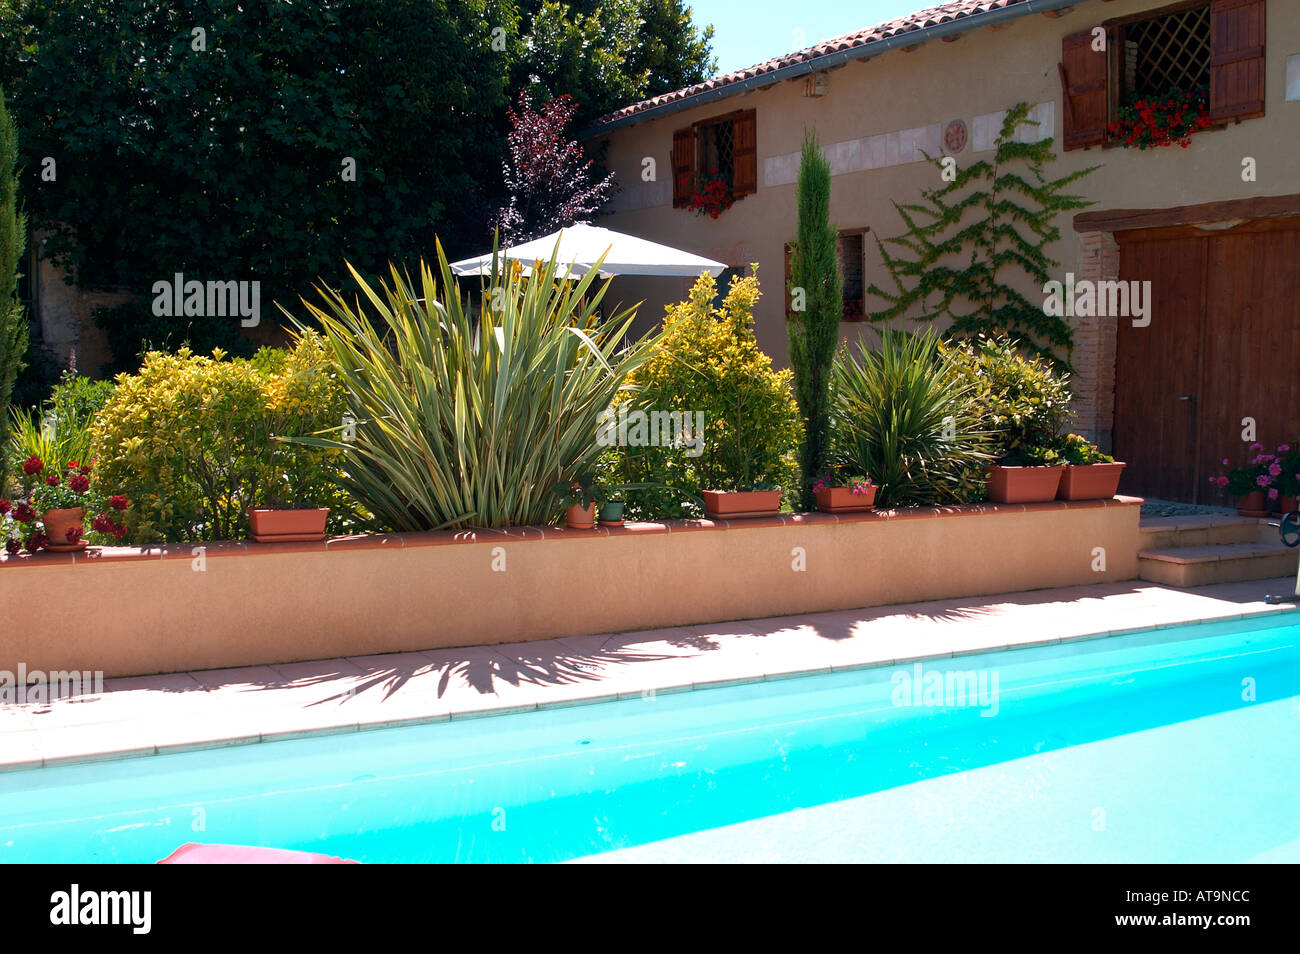 A private pool and garden in the Haute Garonne region of France Stock Photo